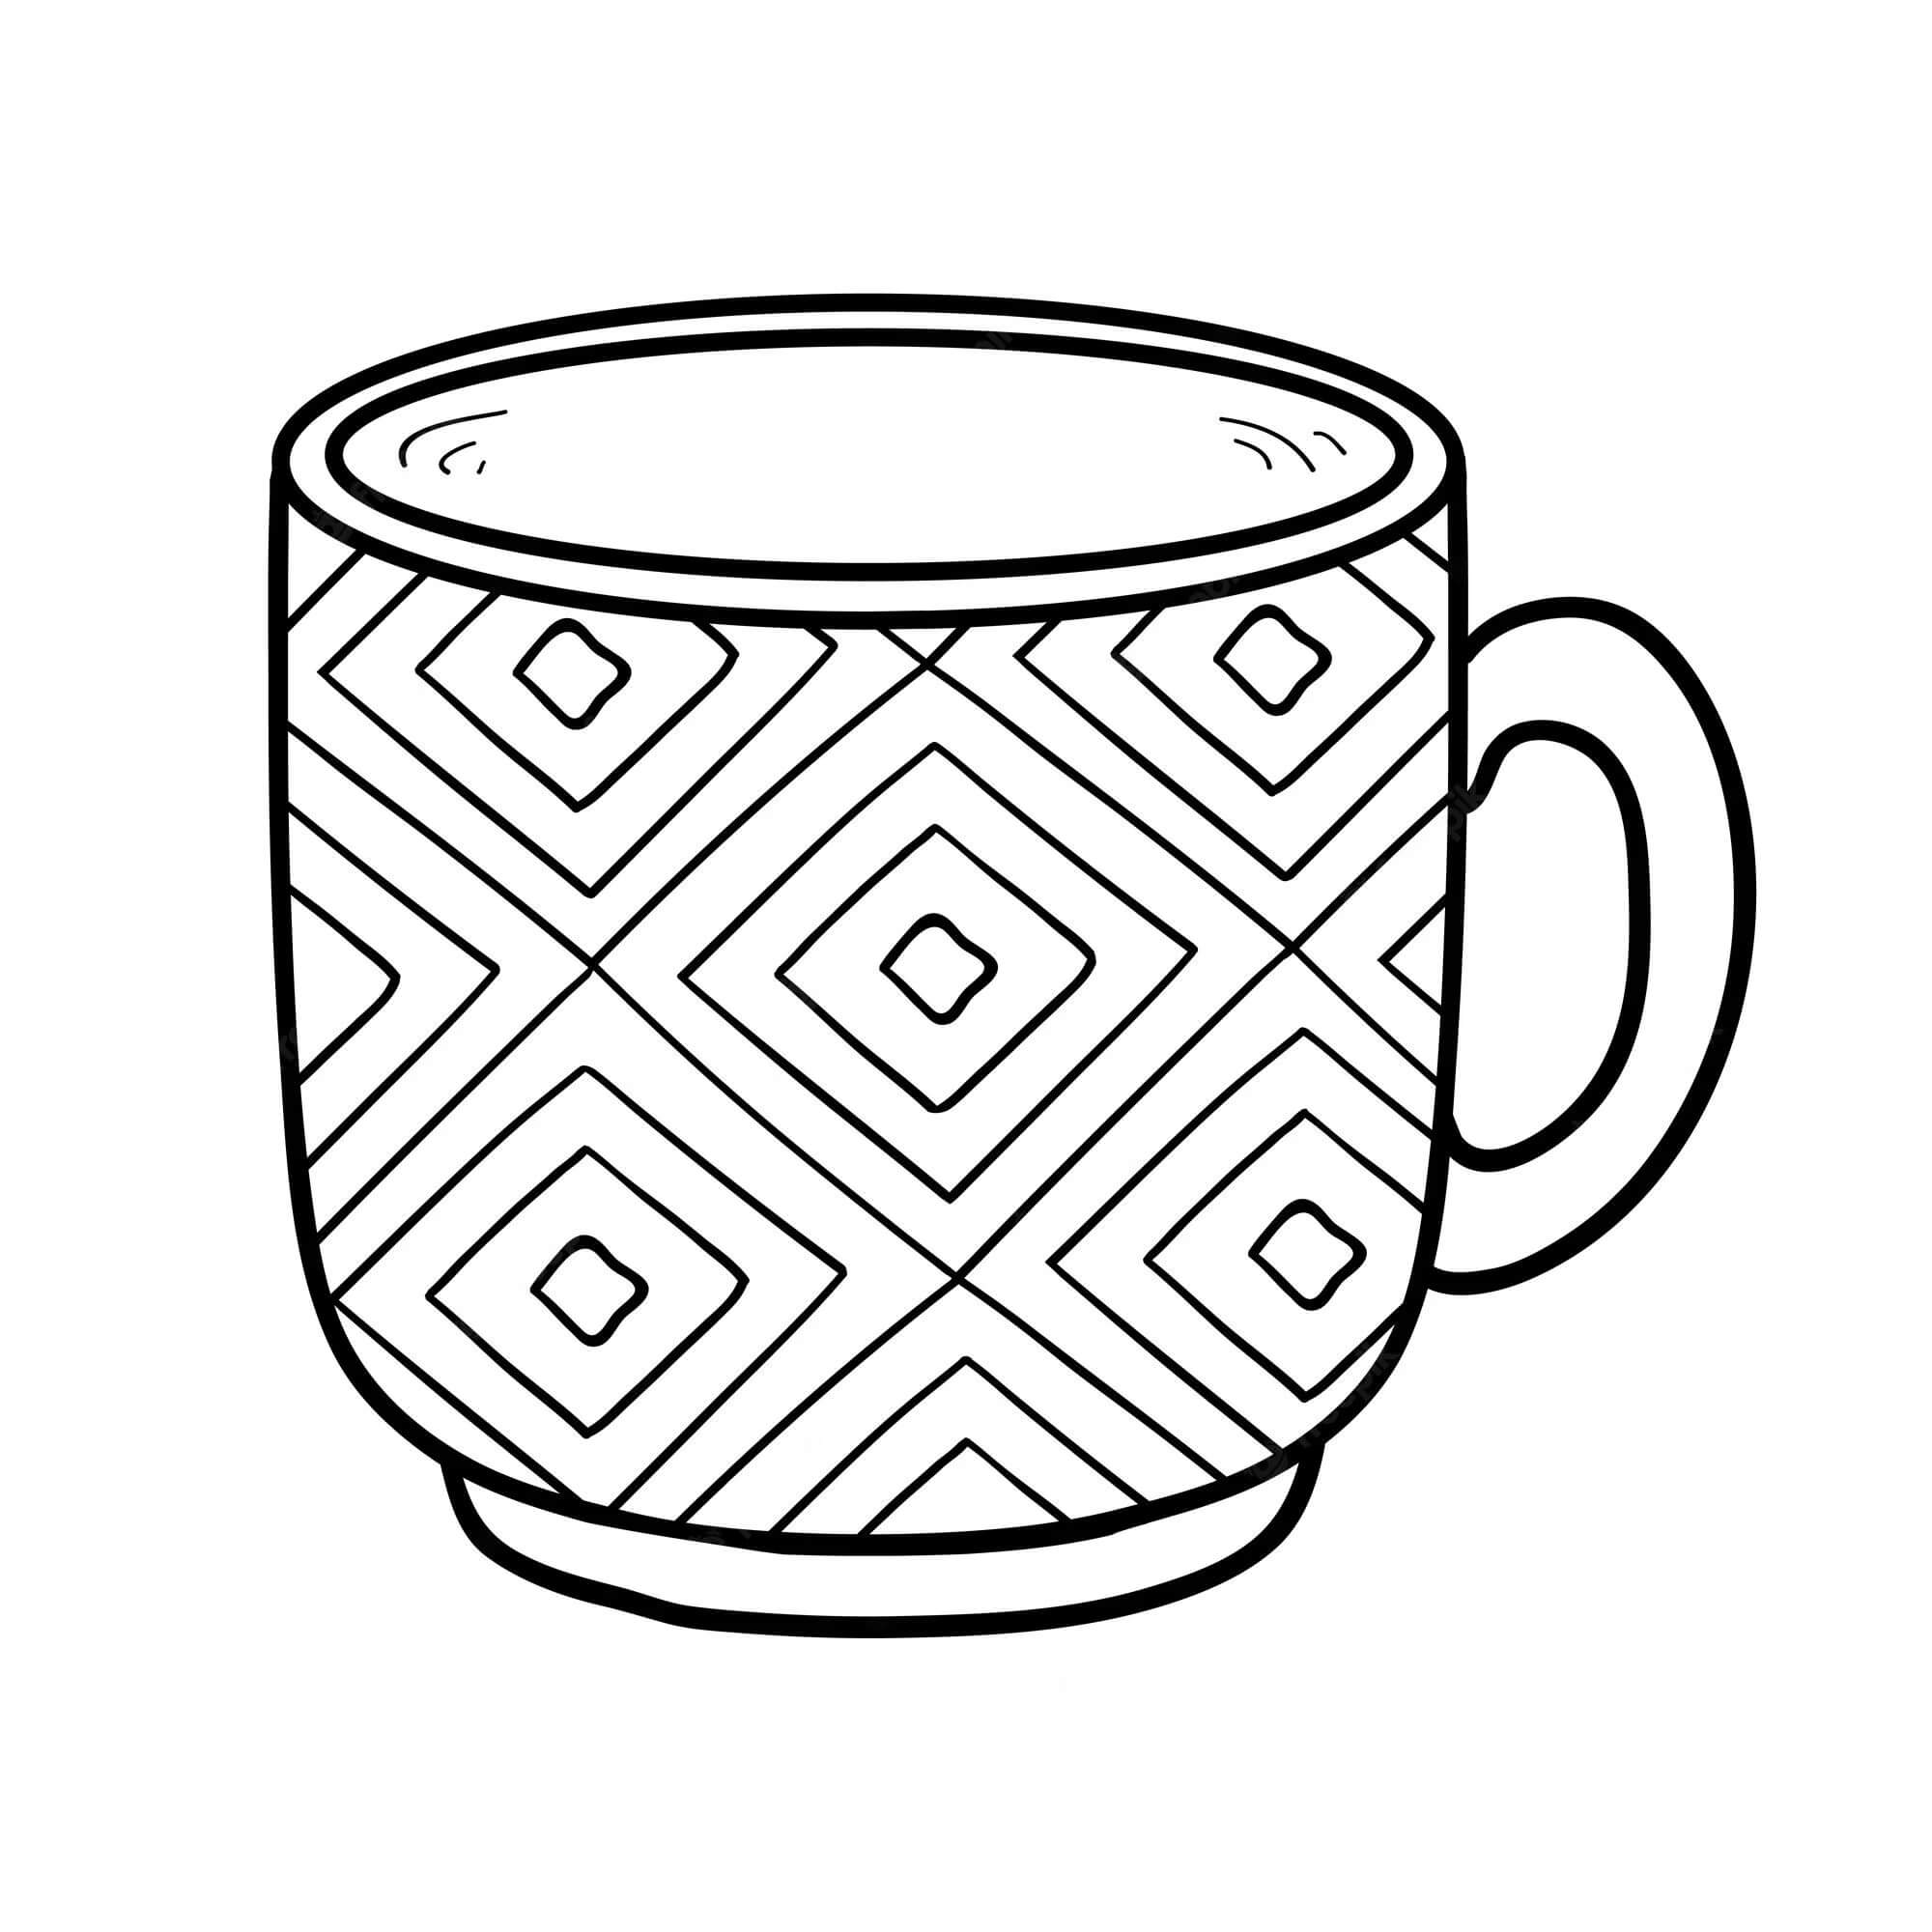 Cup Free Images coloring page - Download, Print or Color Online for Free